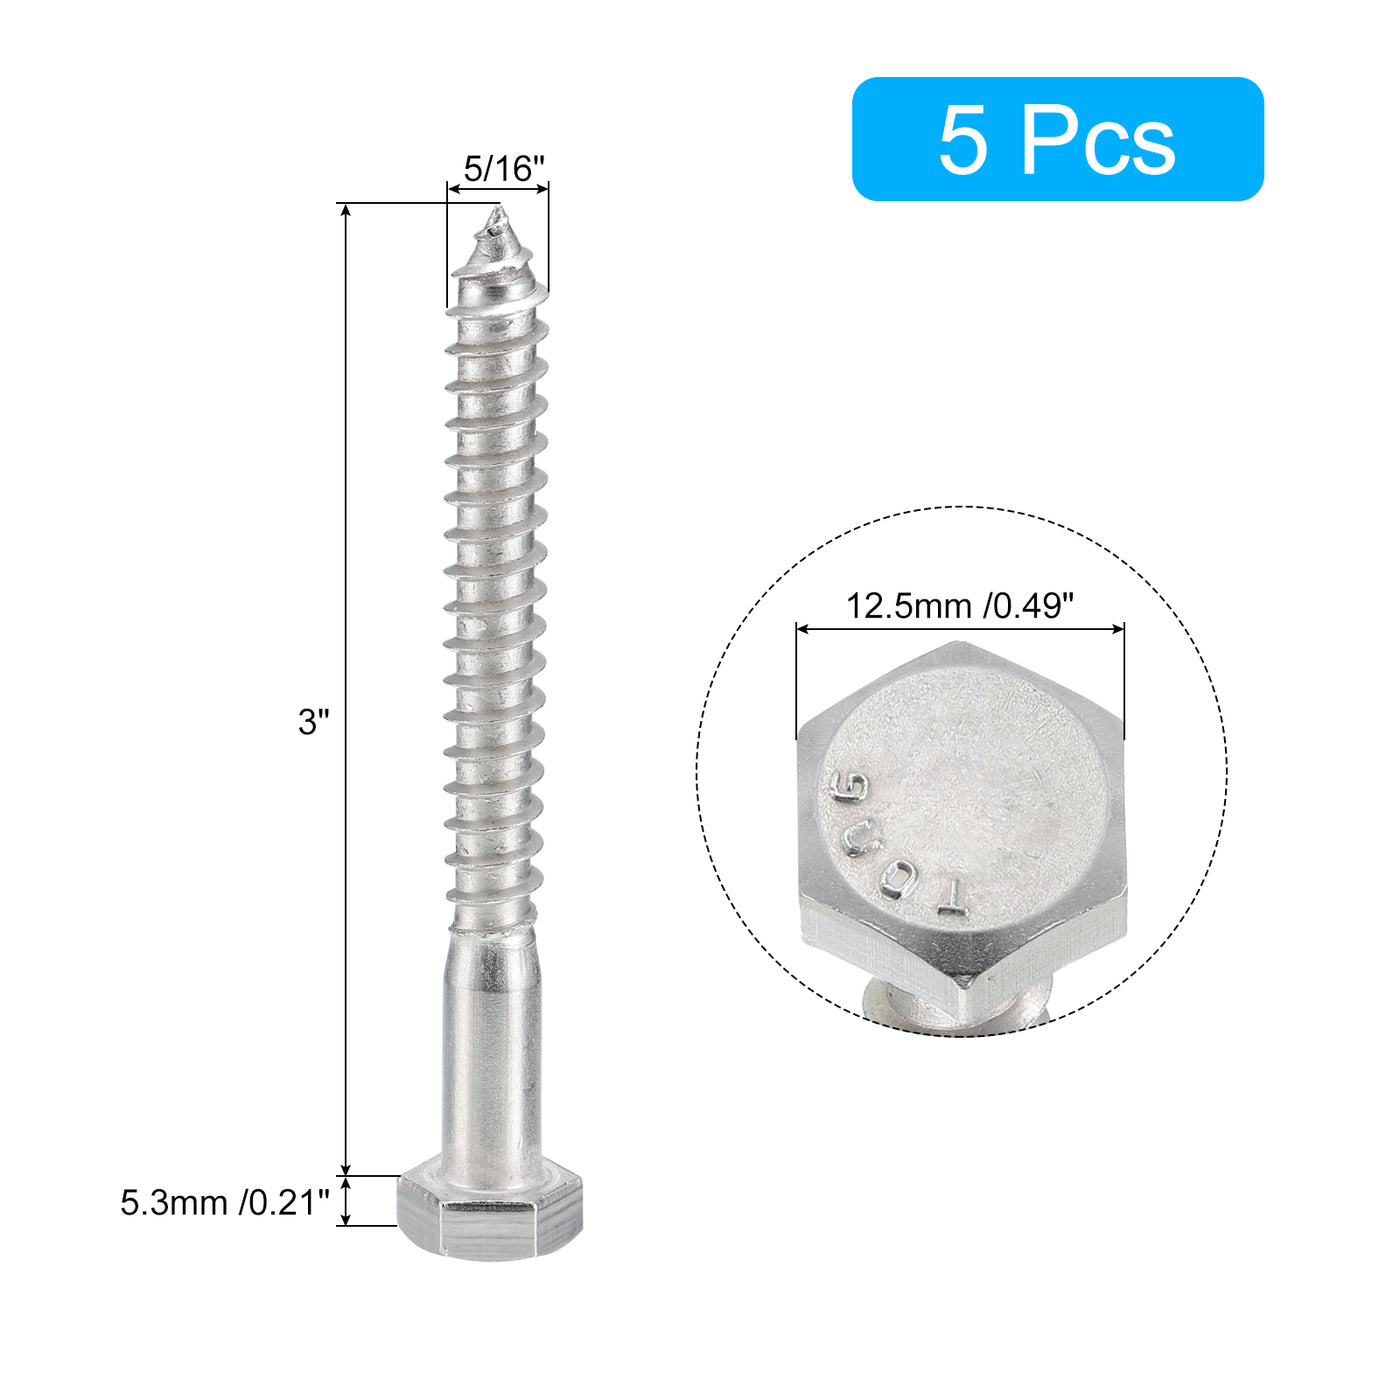 uxcell Uxcell Hex Head Lag Screws Bolts, 5pcs 5/16" x 3" 304 Stainless Steel Wood Screws